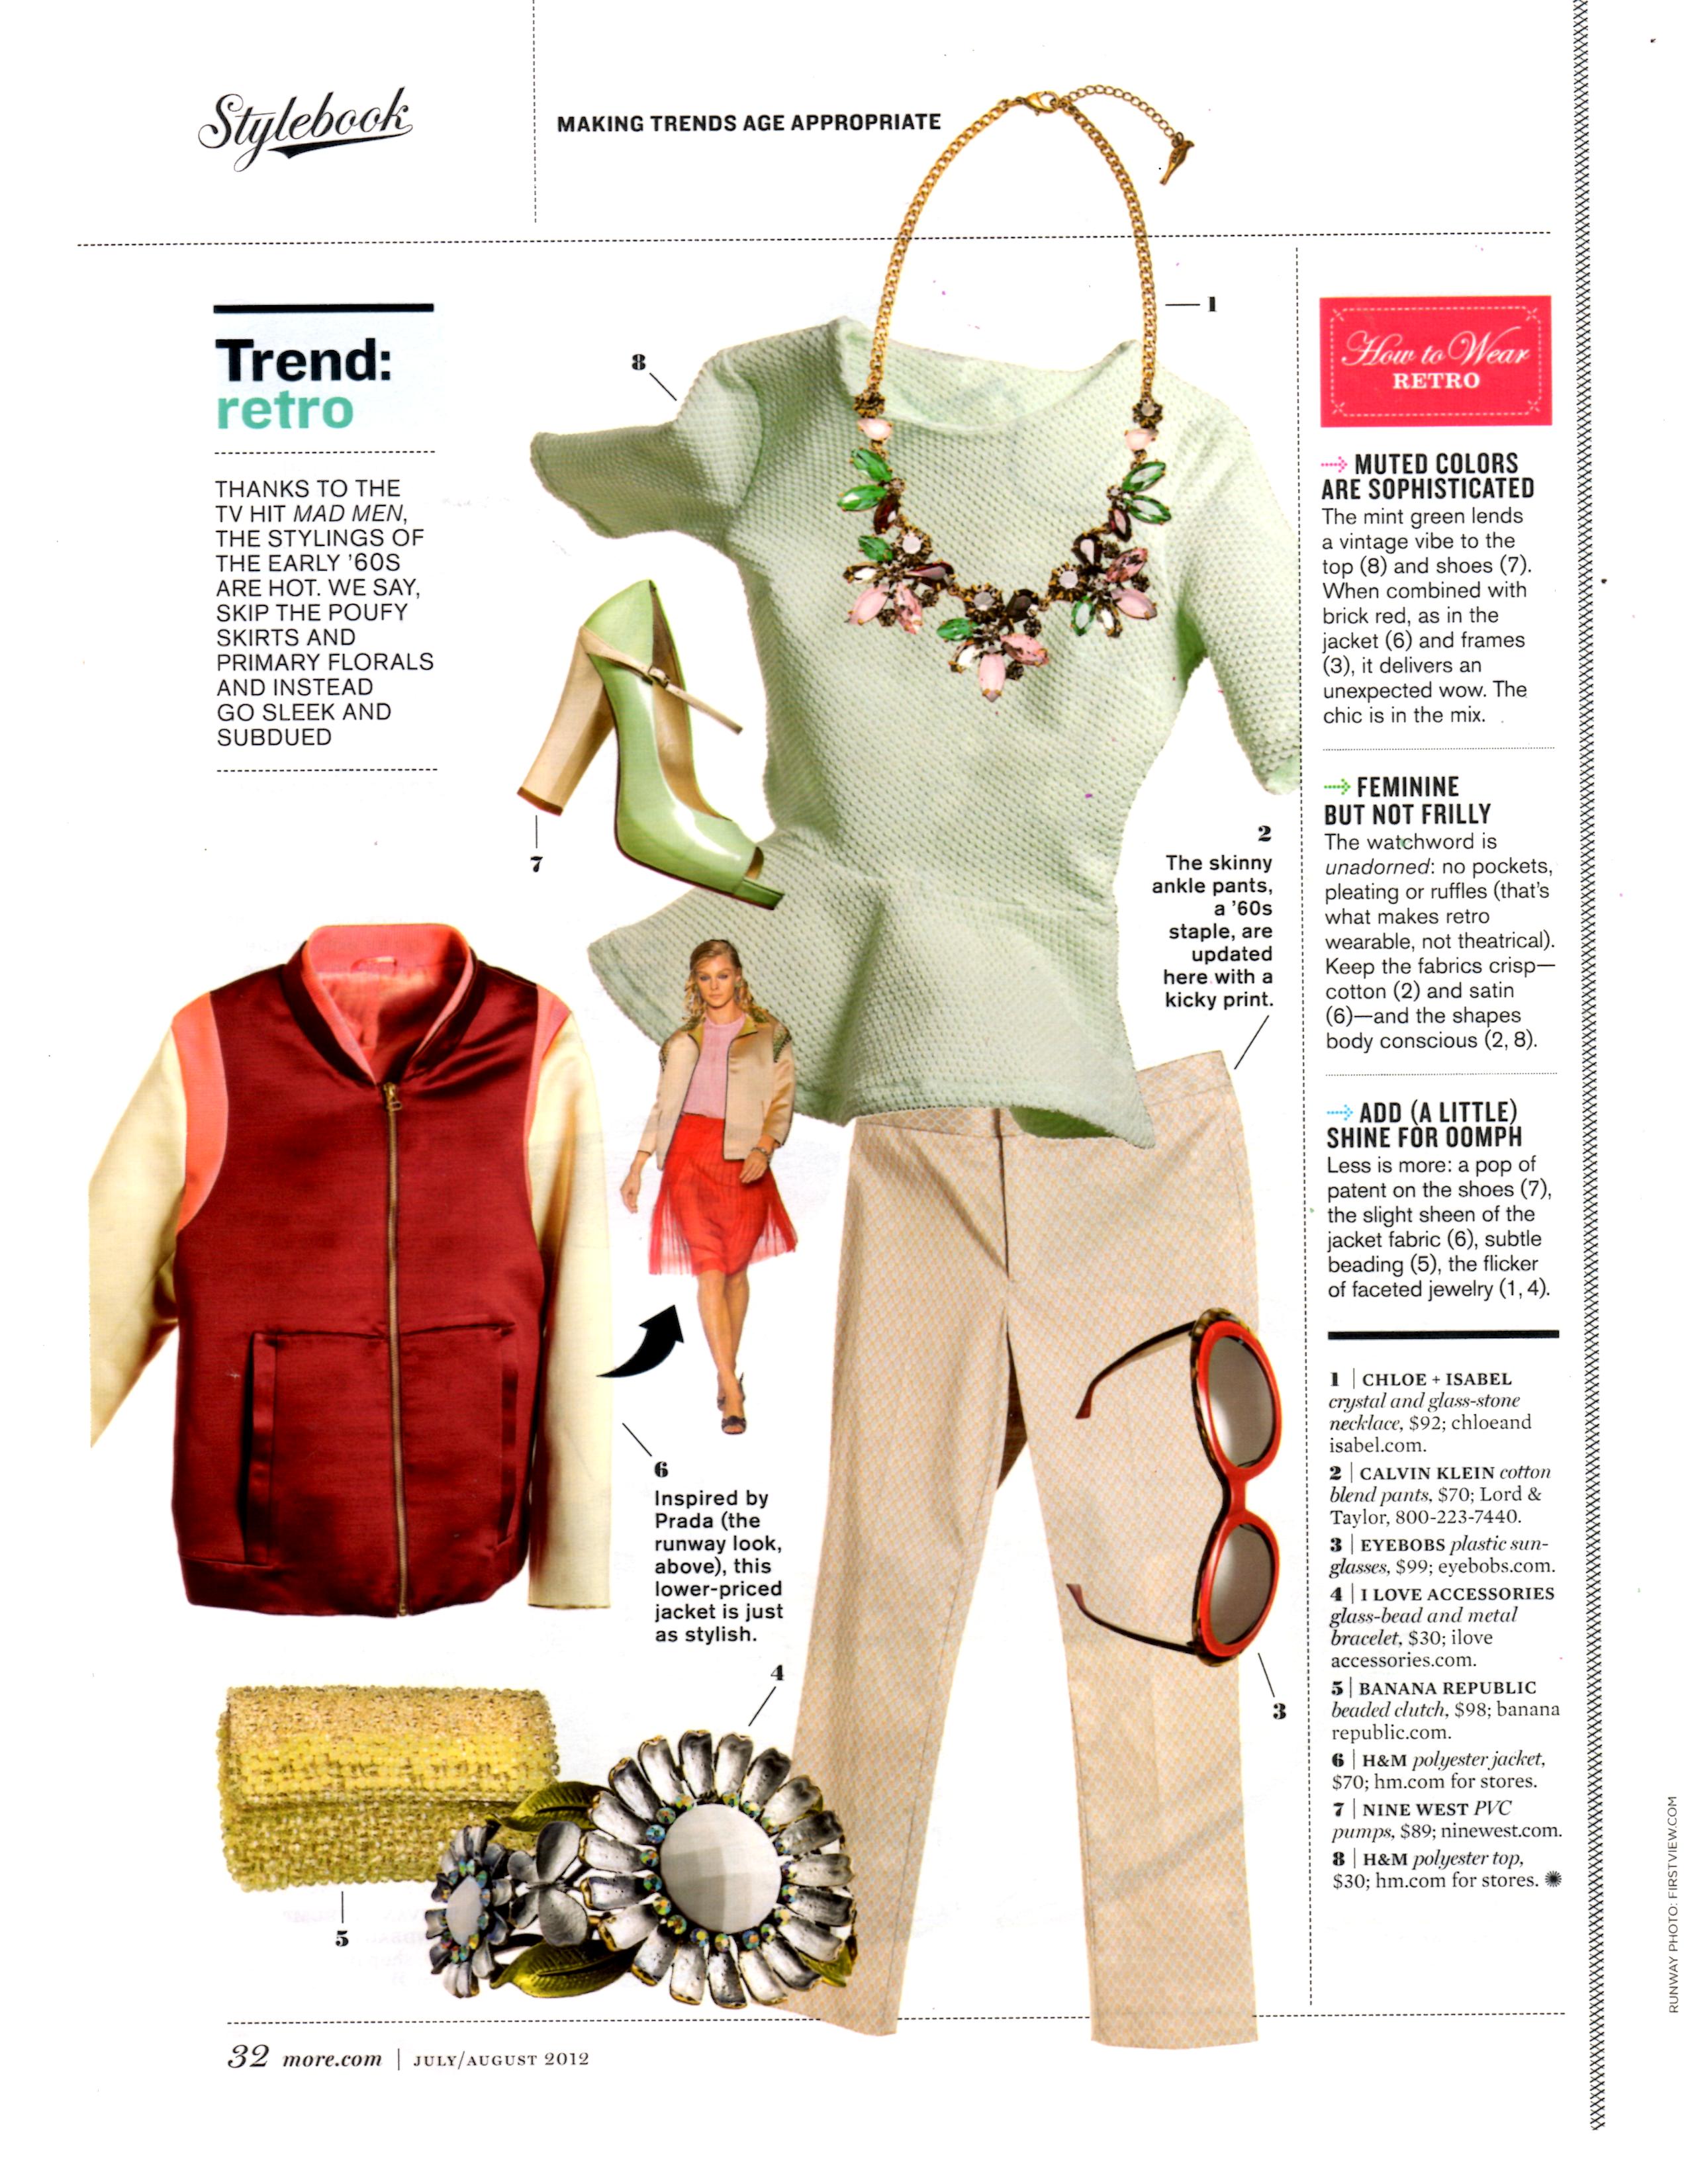 Retro Trend from More Magazine July / August